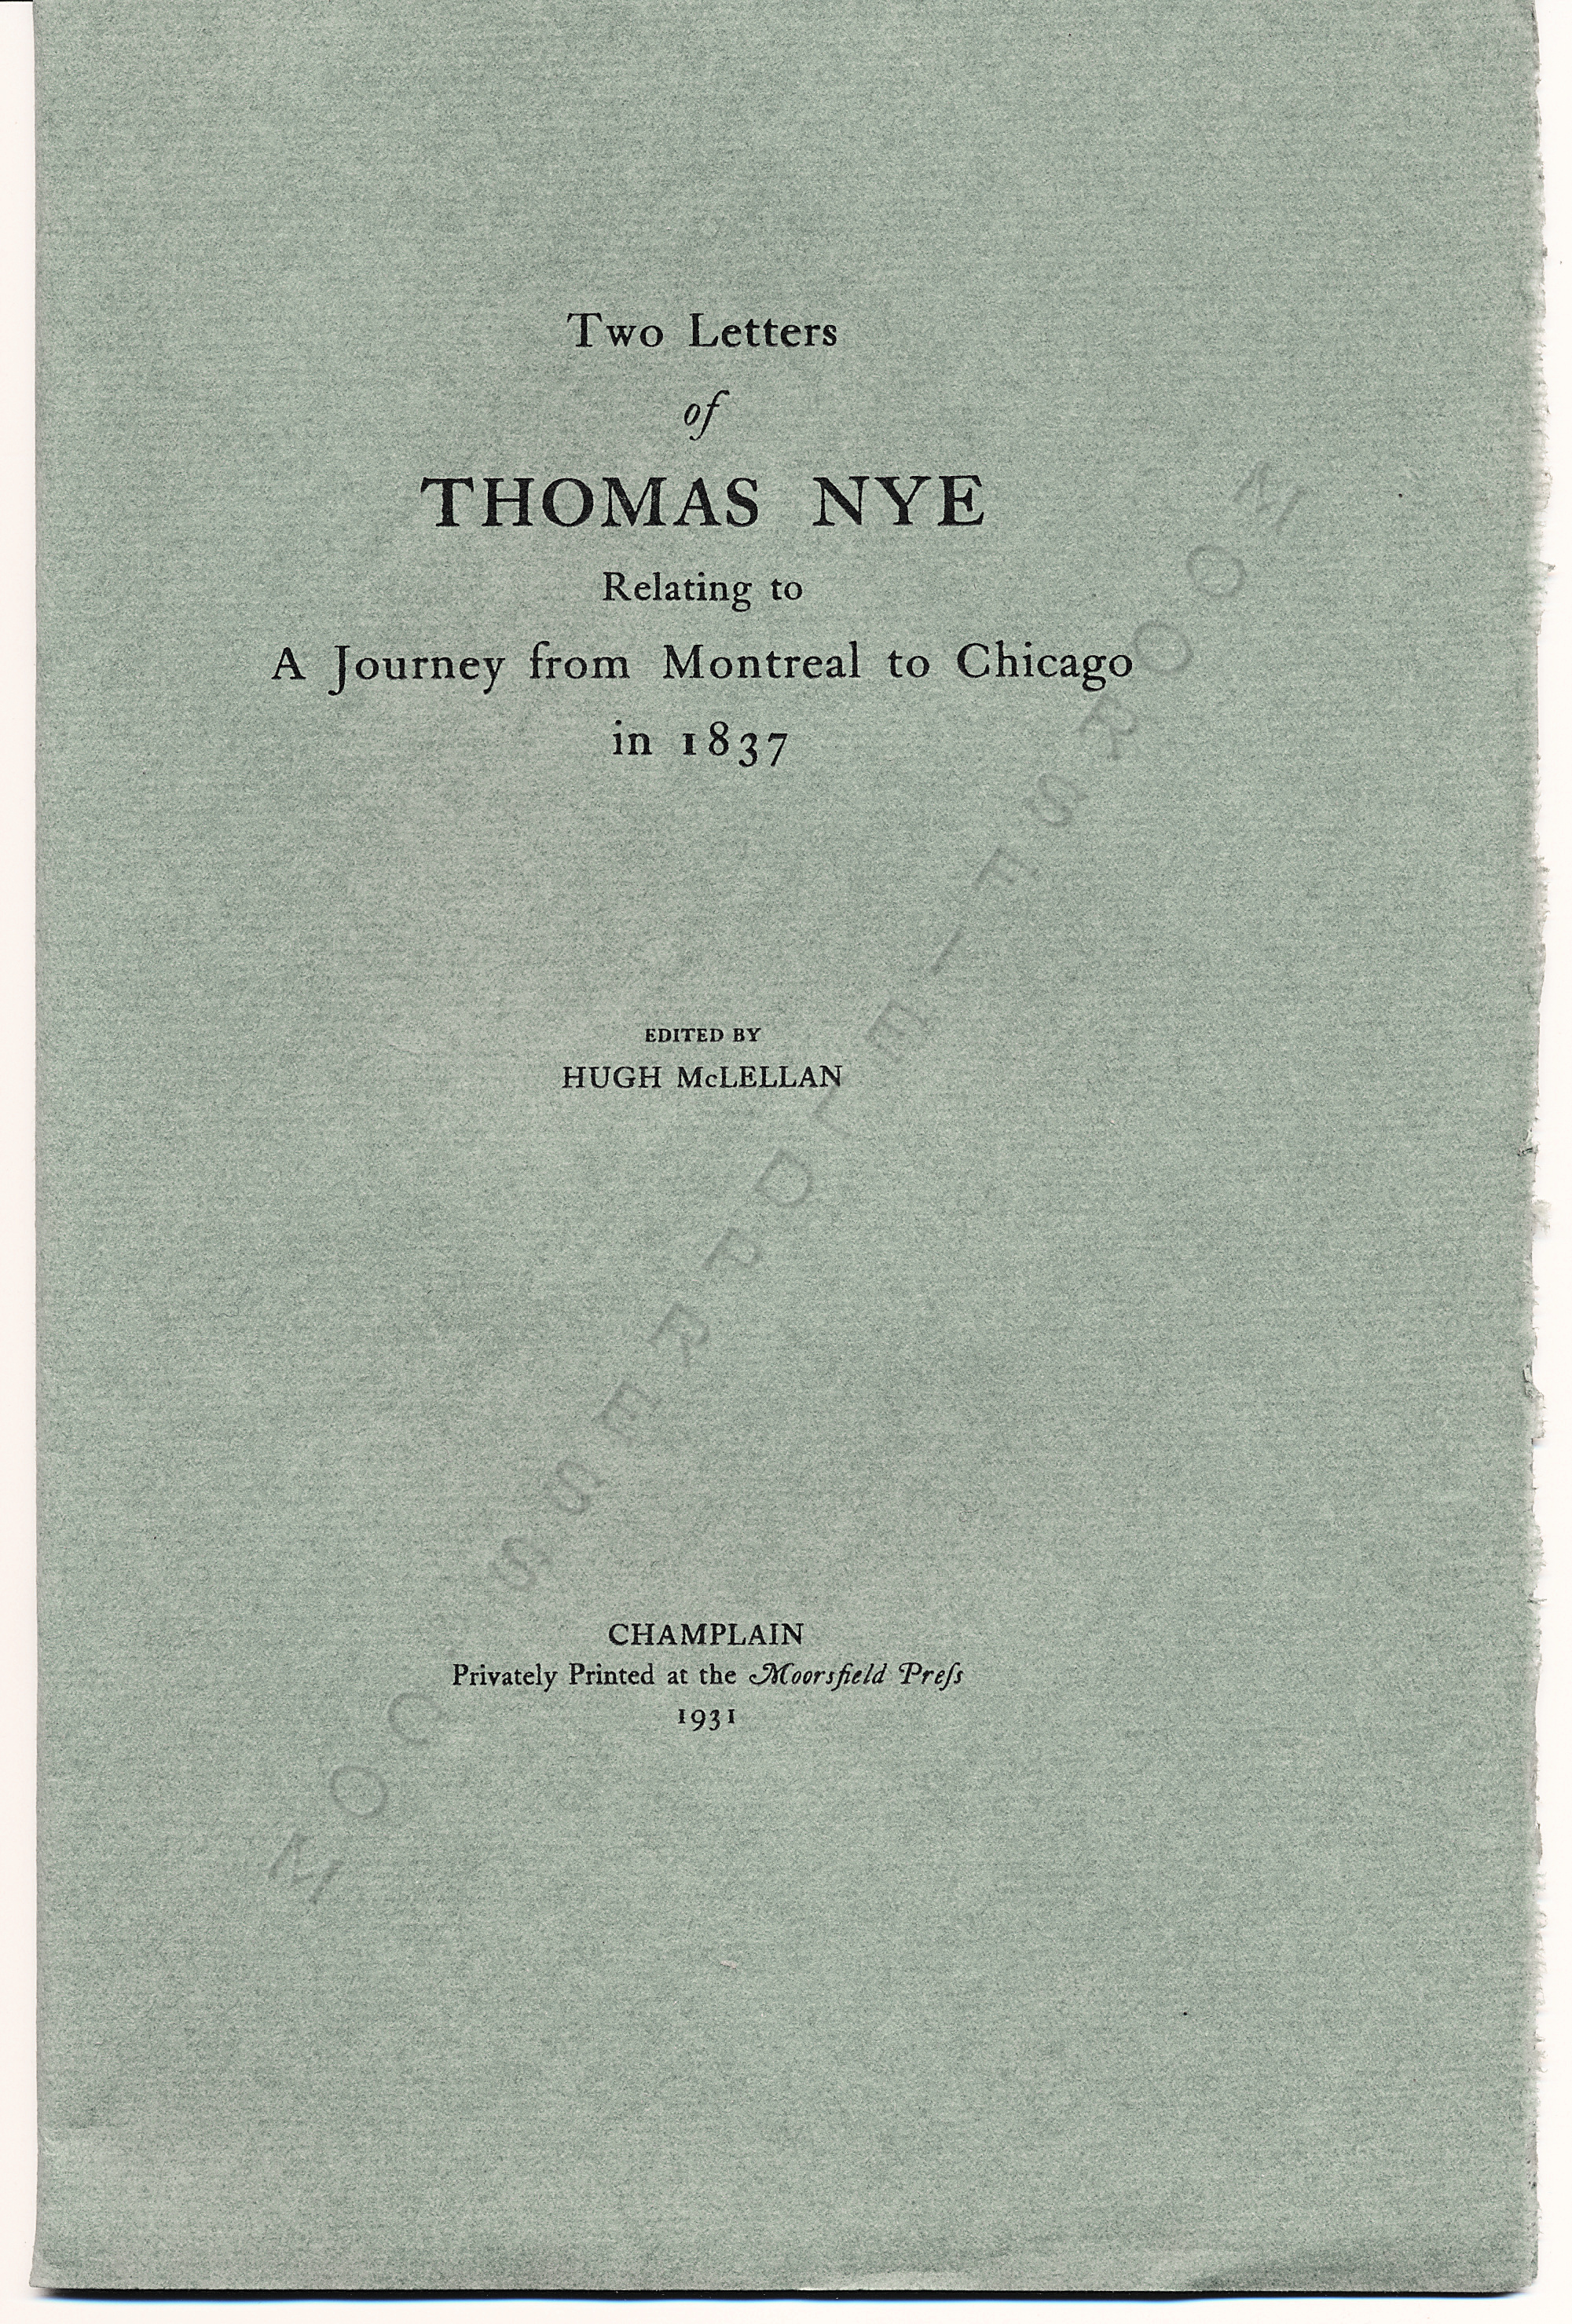 moorsfield press publication-two
                              letters of thomas nye relating to a
                              journey from montreal to chicago